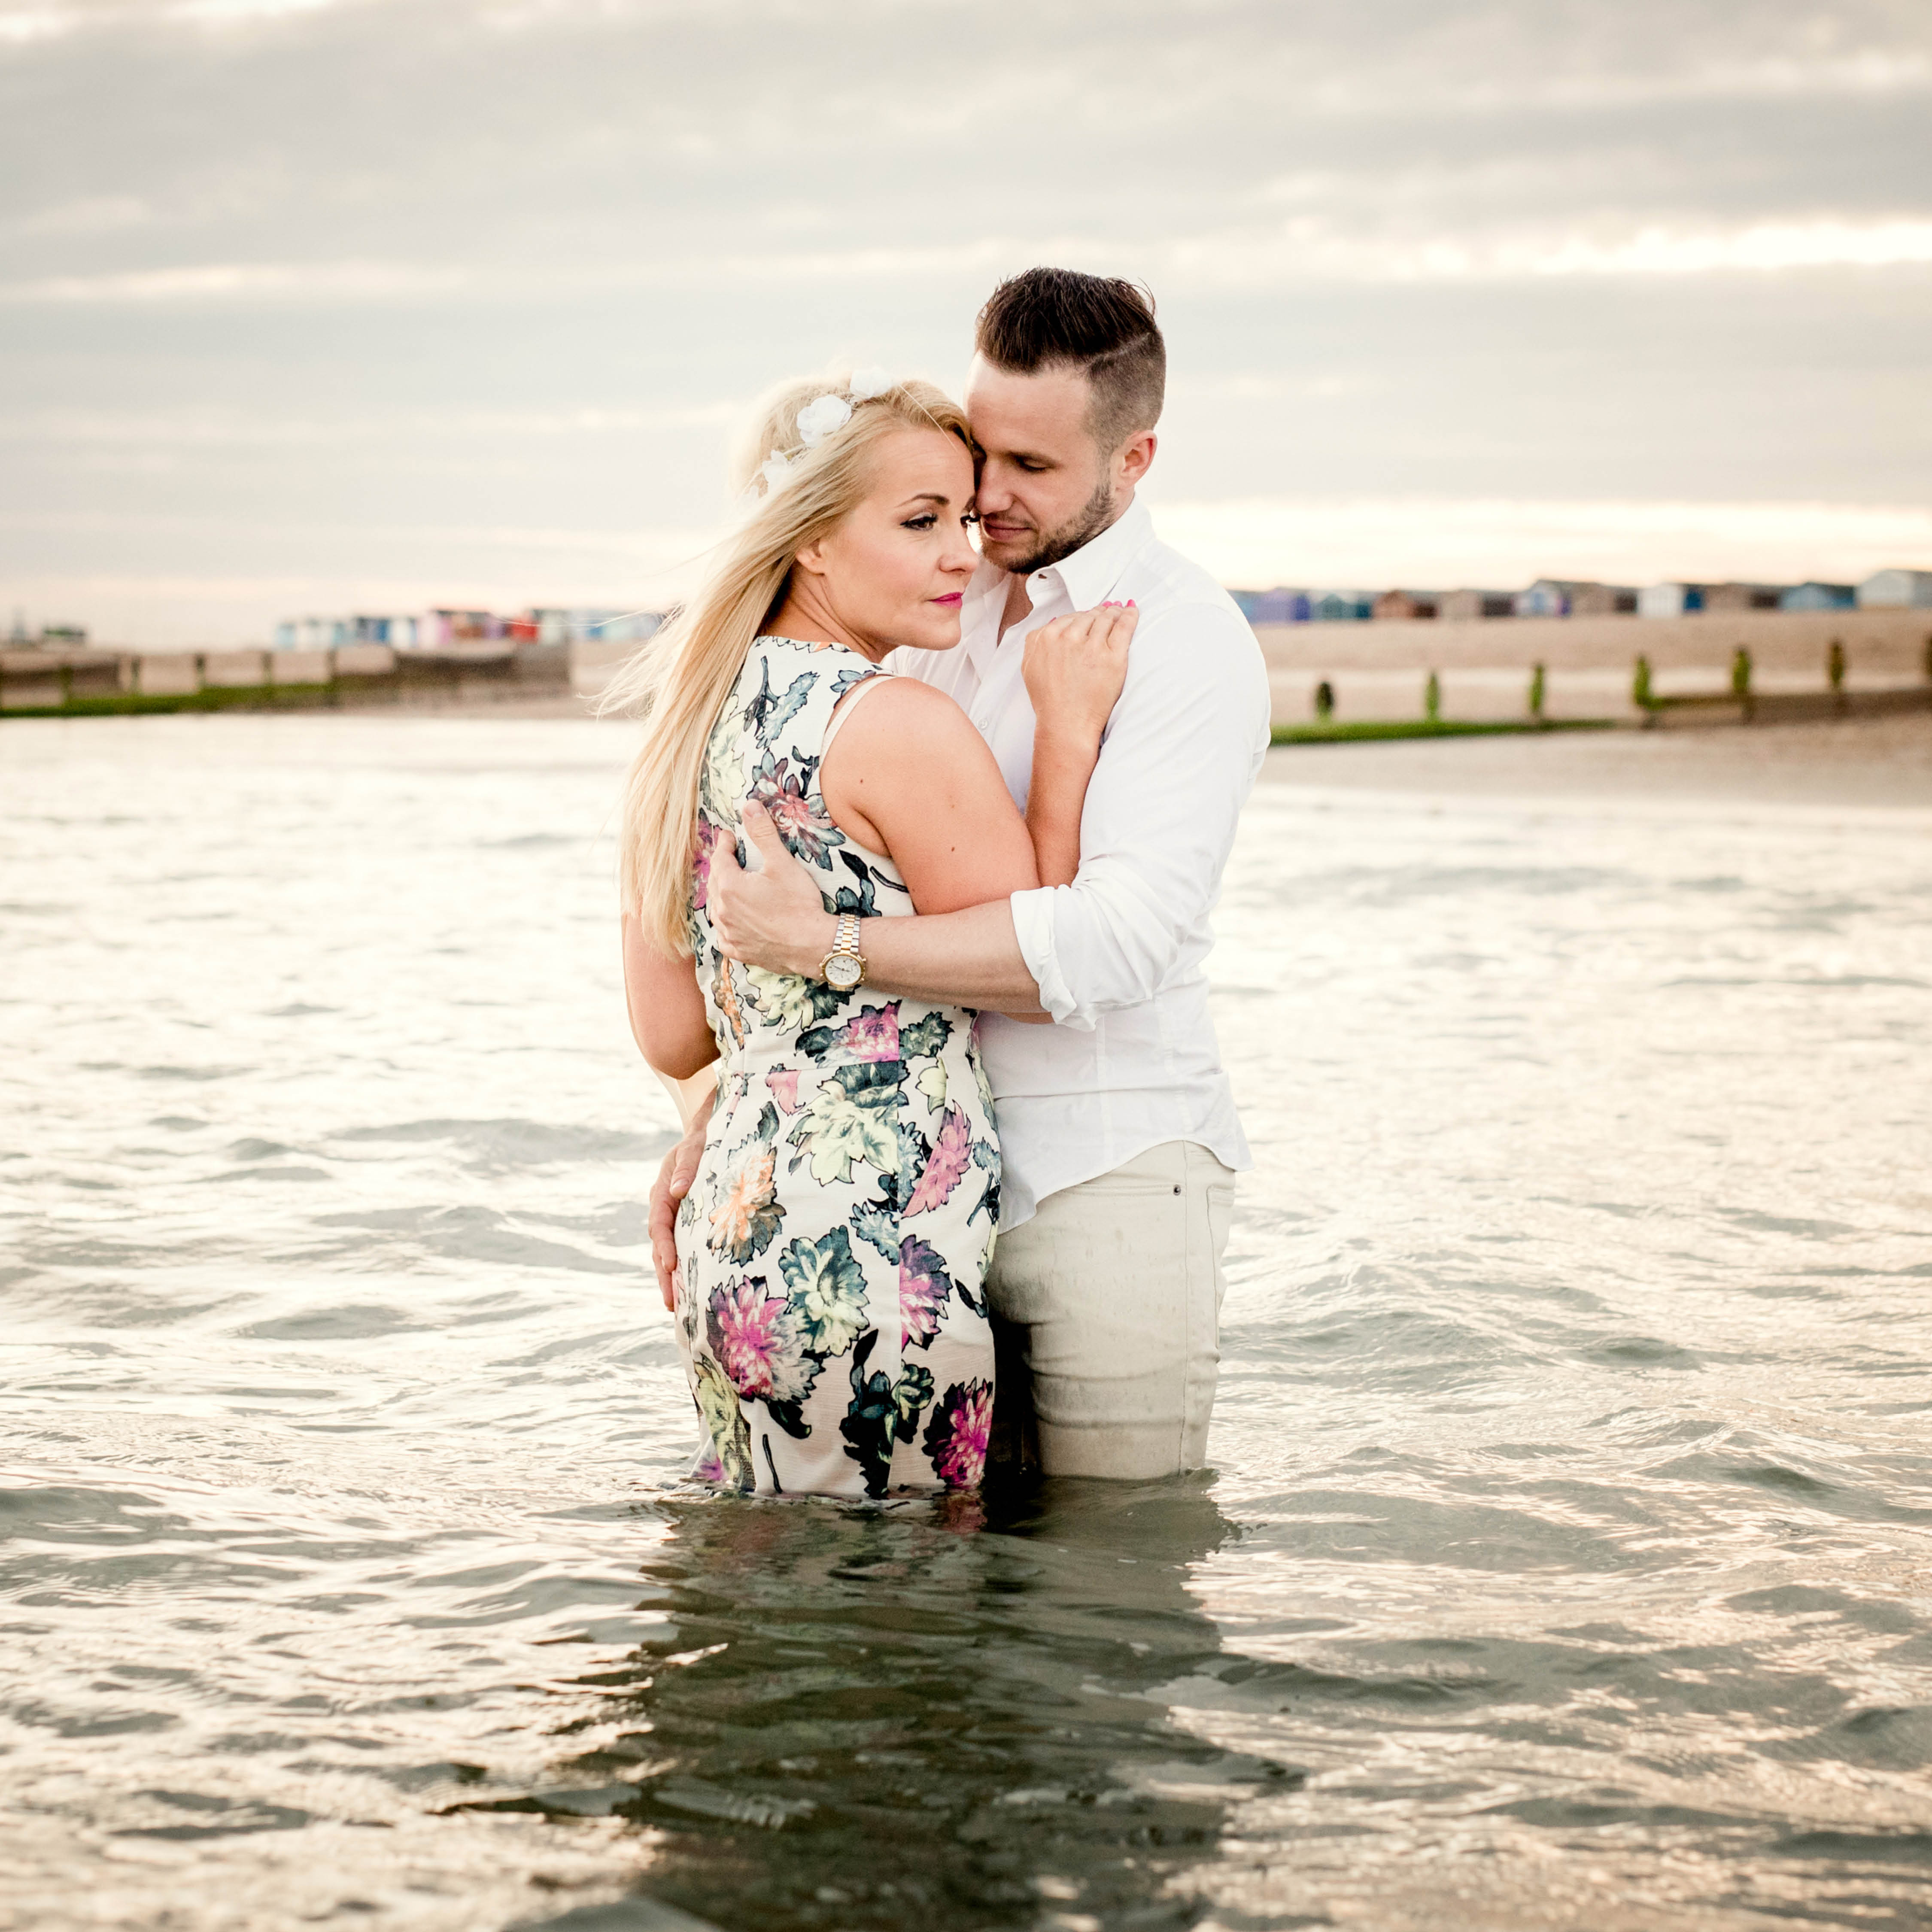 How To Choose The Right Wedding Photographer For Your Special Day, pre wedding photo shoot